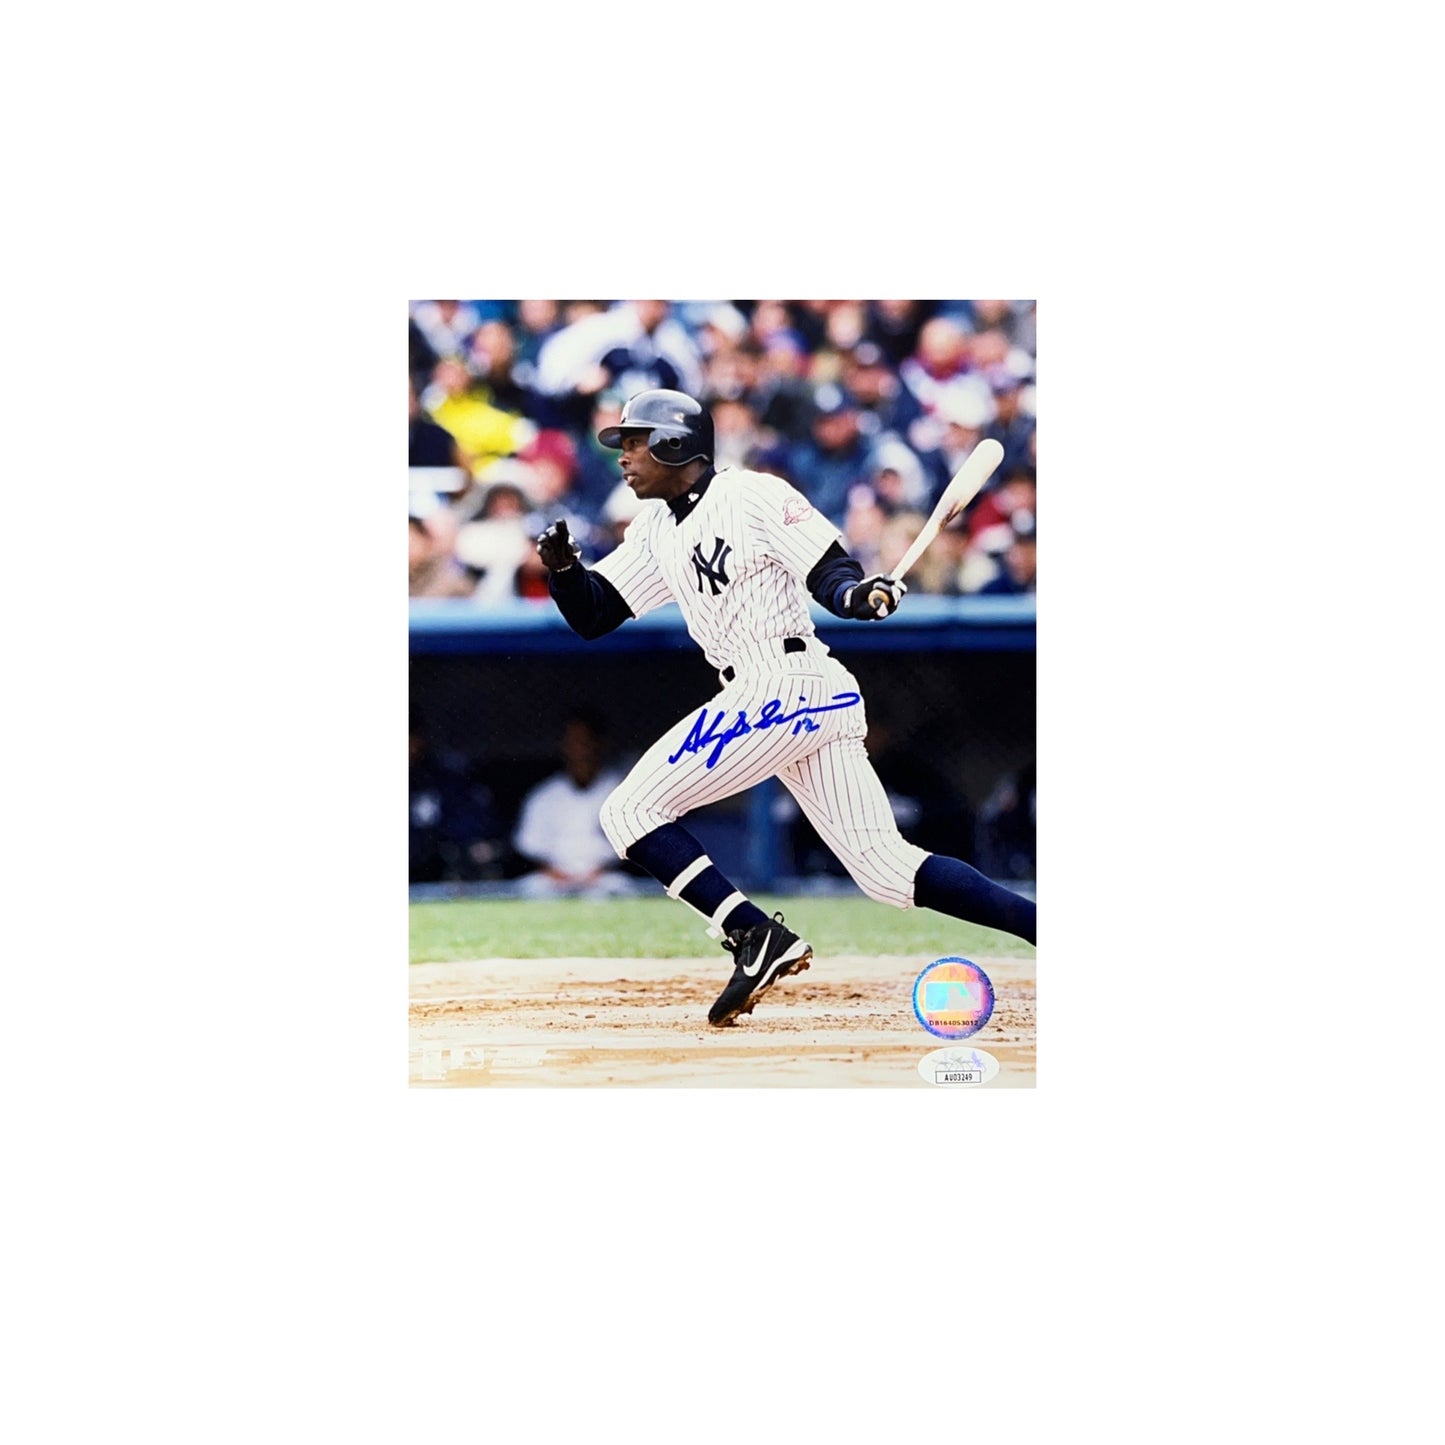 Alfonso Soriano Autographed New York Yankees Swing 8x10 JSA